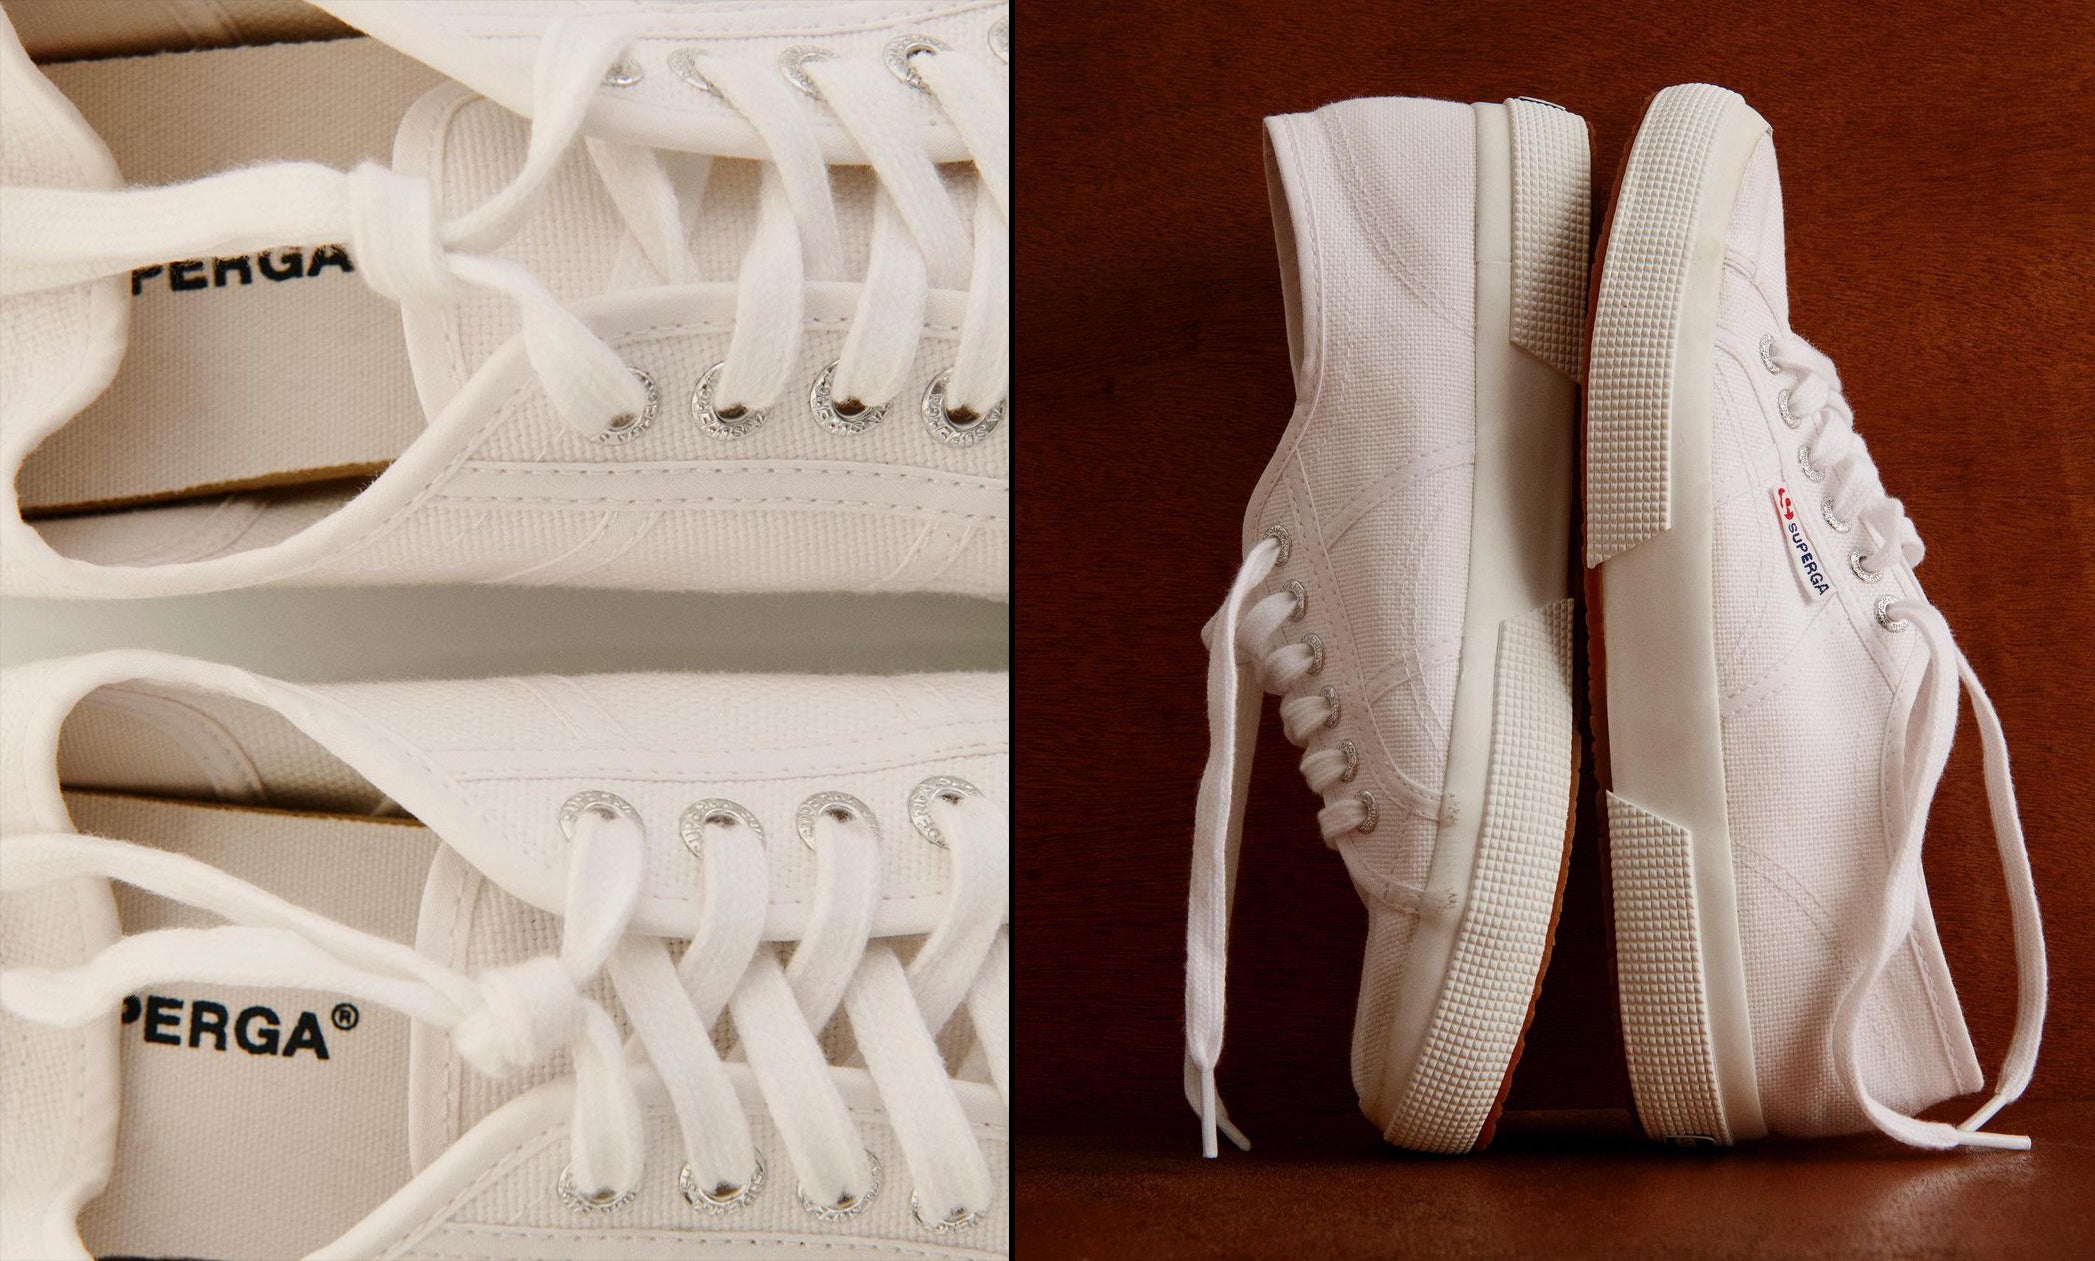 Superga 2750 Cotu Classic Sneakers in White. How to clean the Classic Superga White Sneakers.